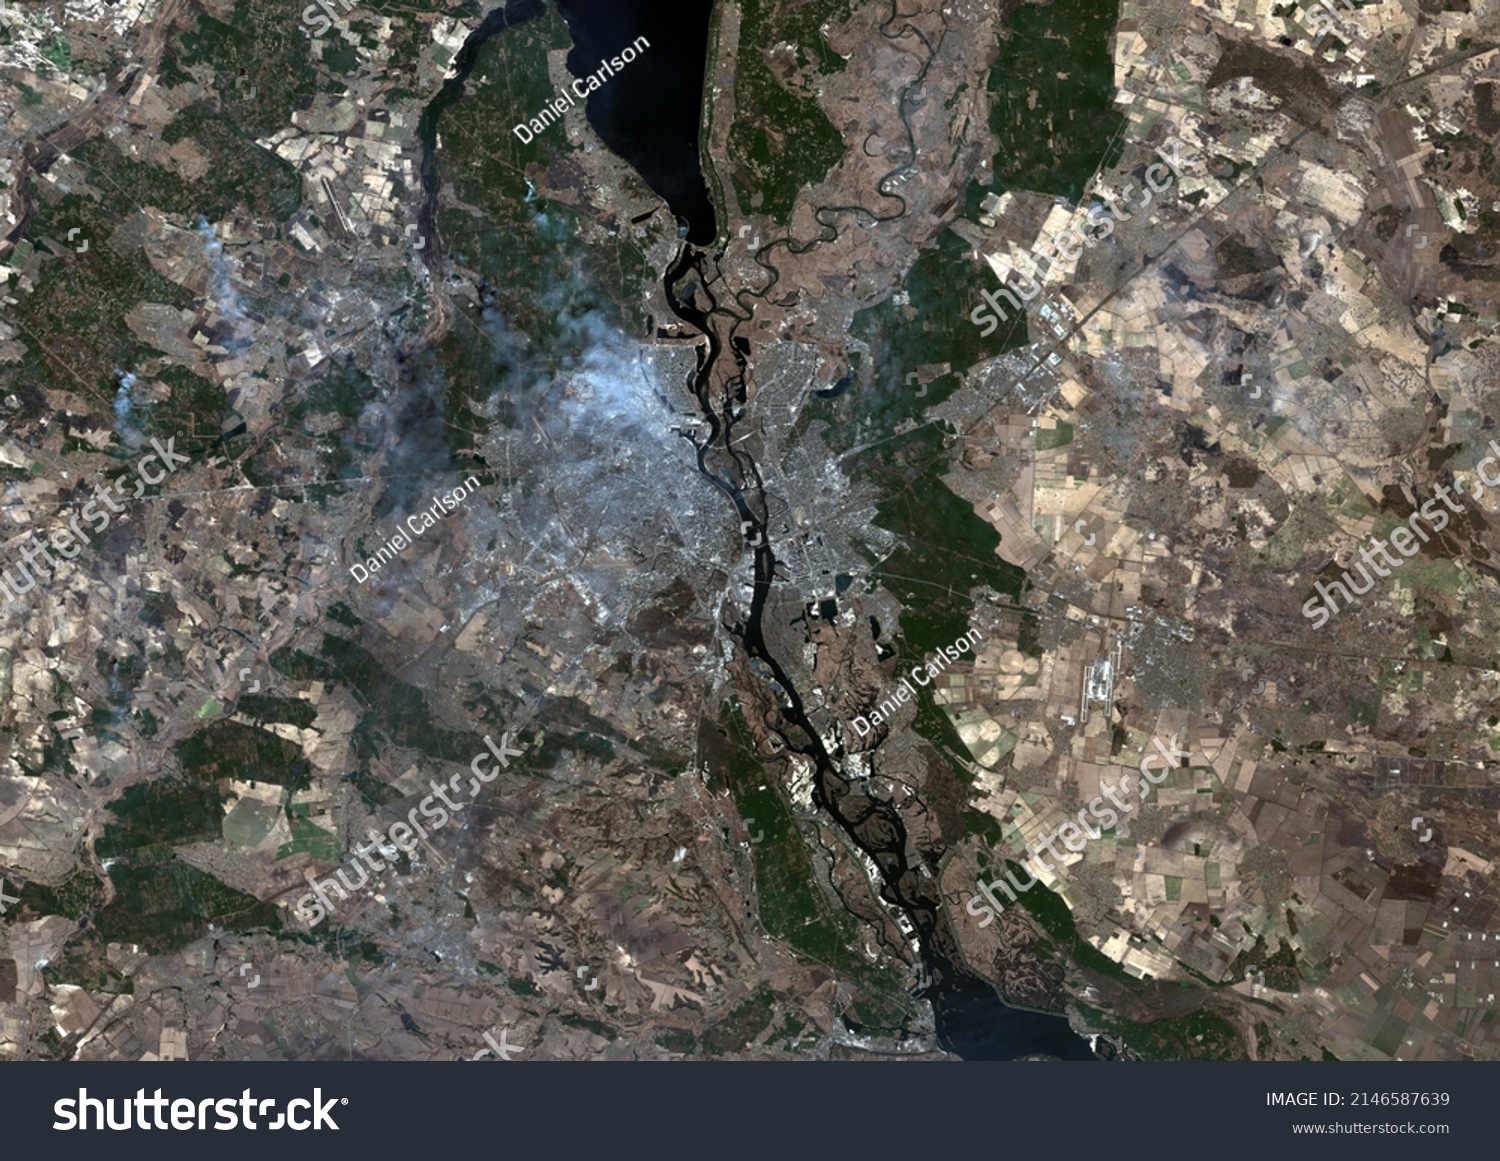 A satellite map of Kiev, Ukraine and surroundings on 23 March 2022 shows smoke rising from several fires #2146587639